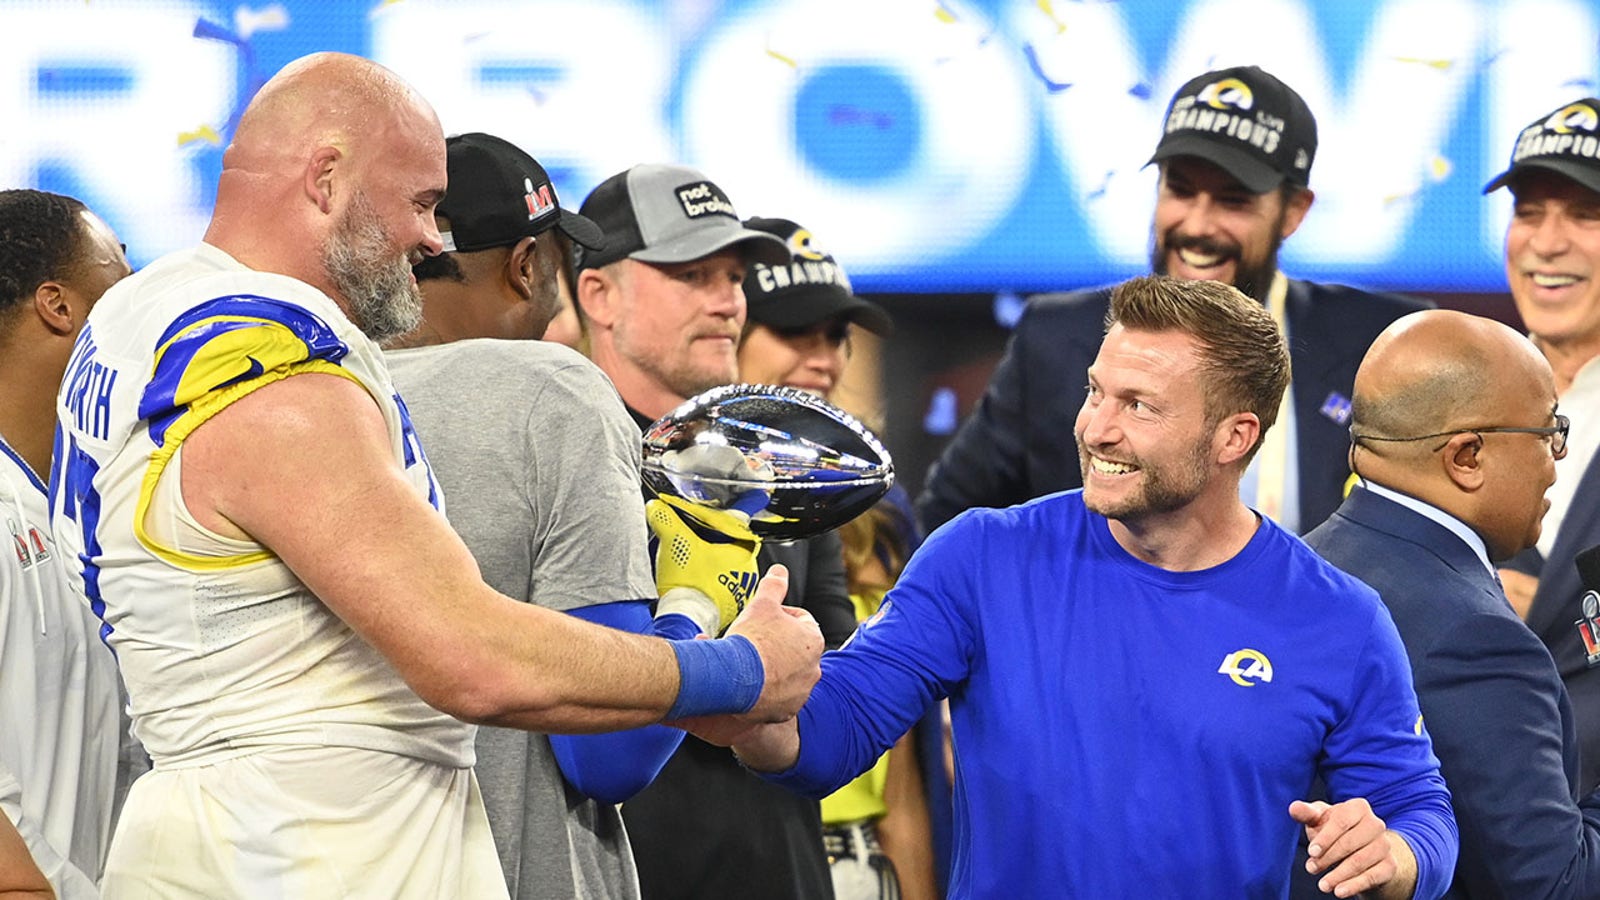 'So proud to be associated with them' — Sean McVay on the Rams